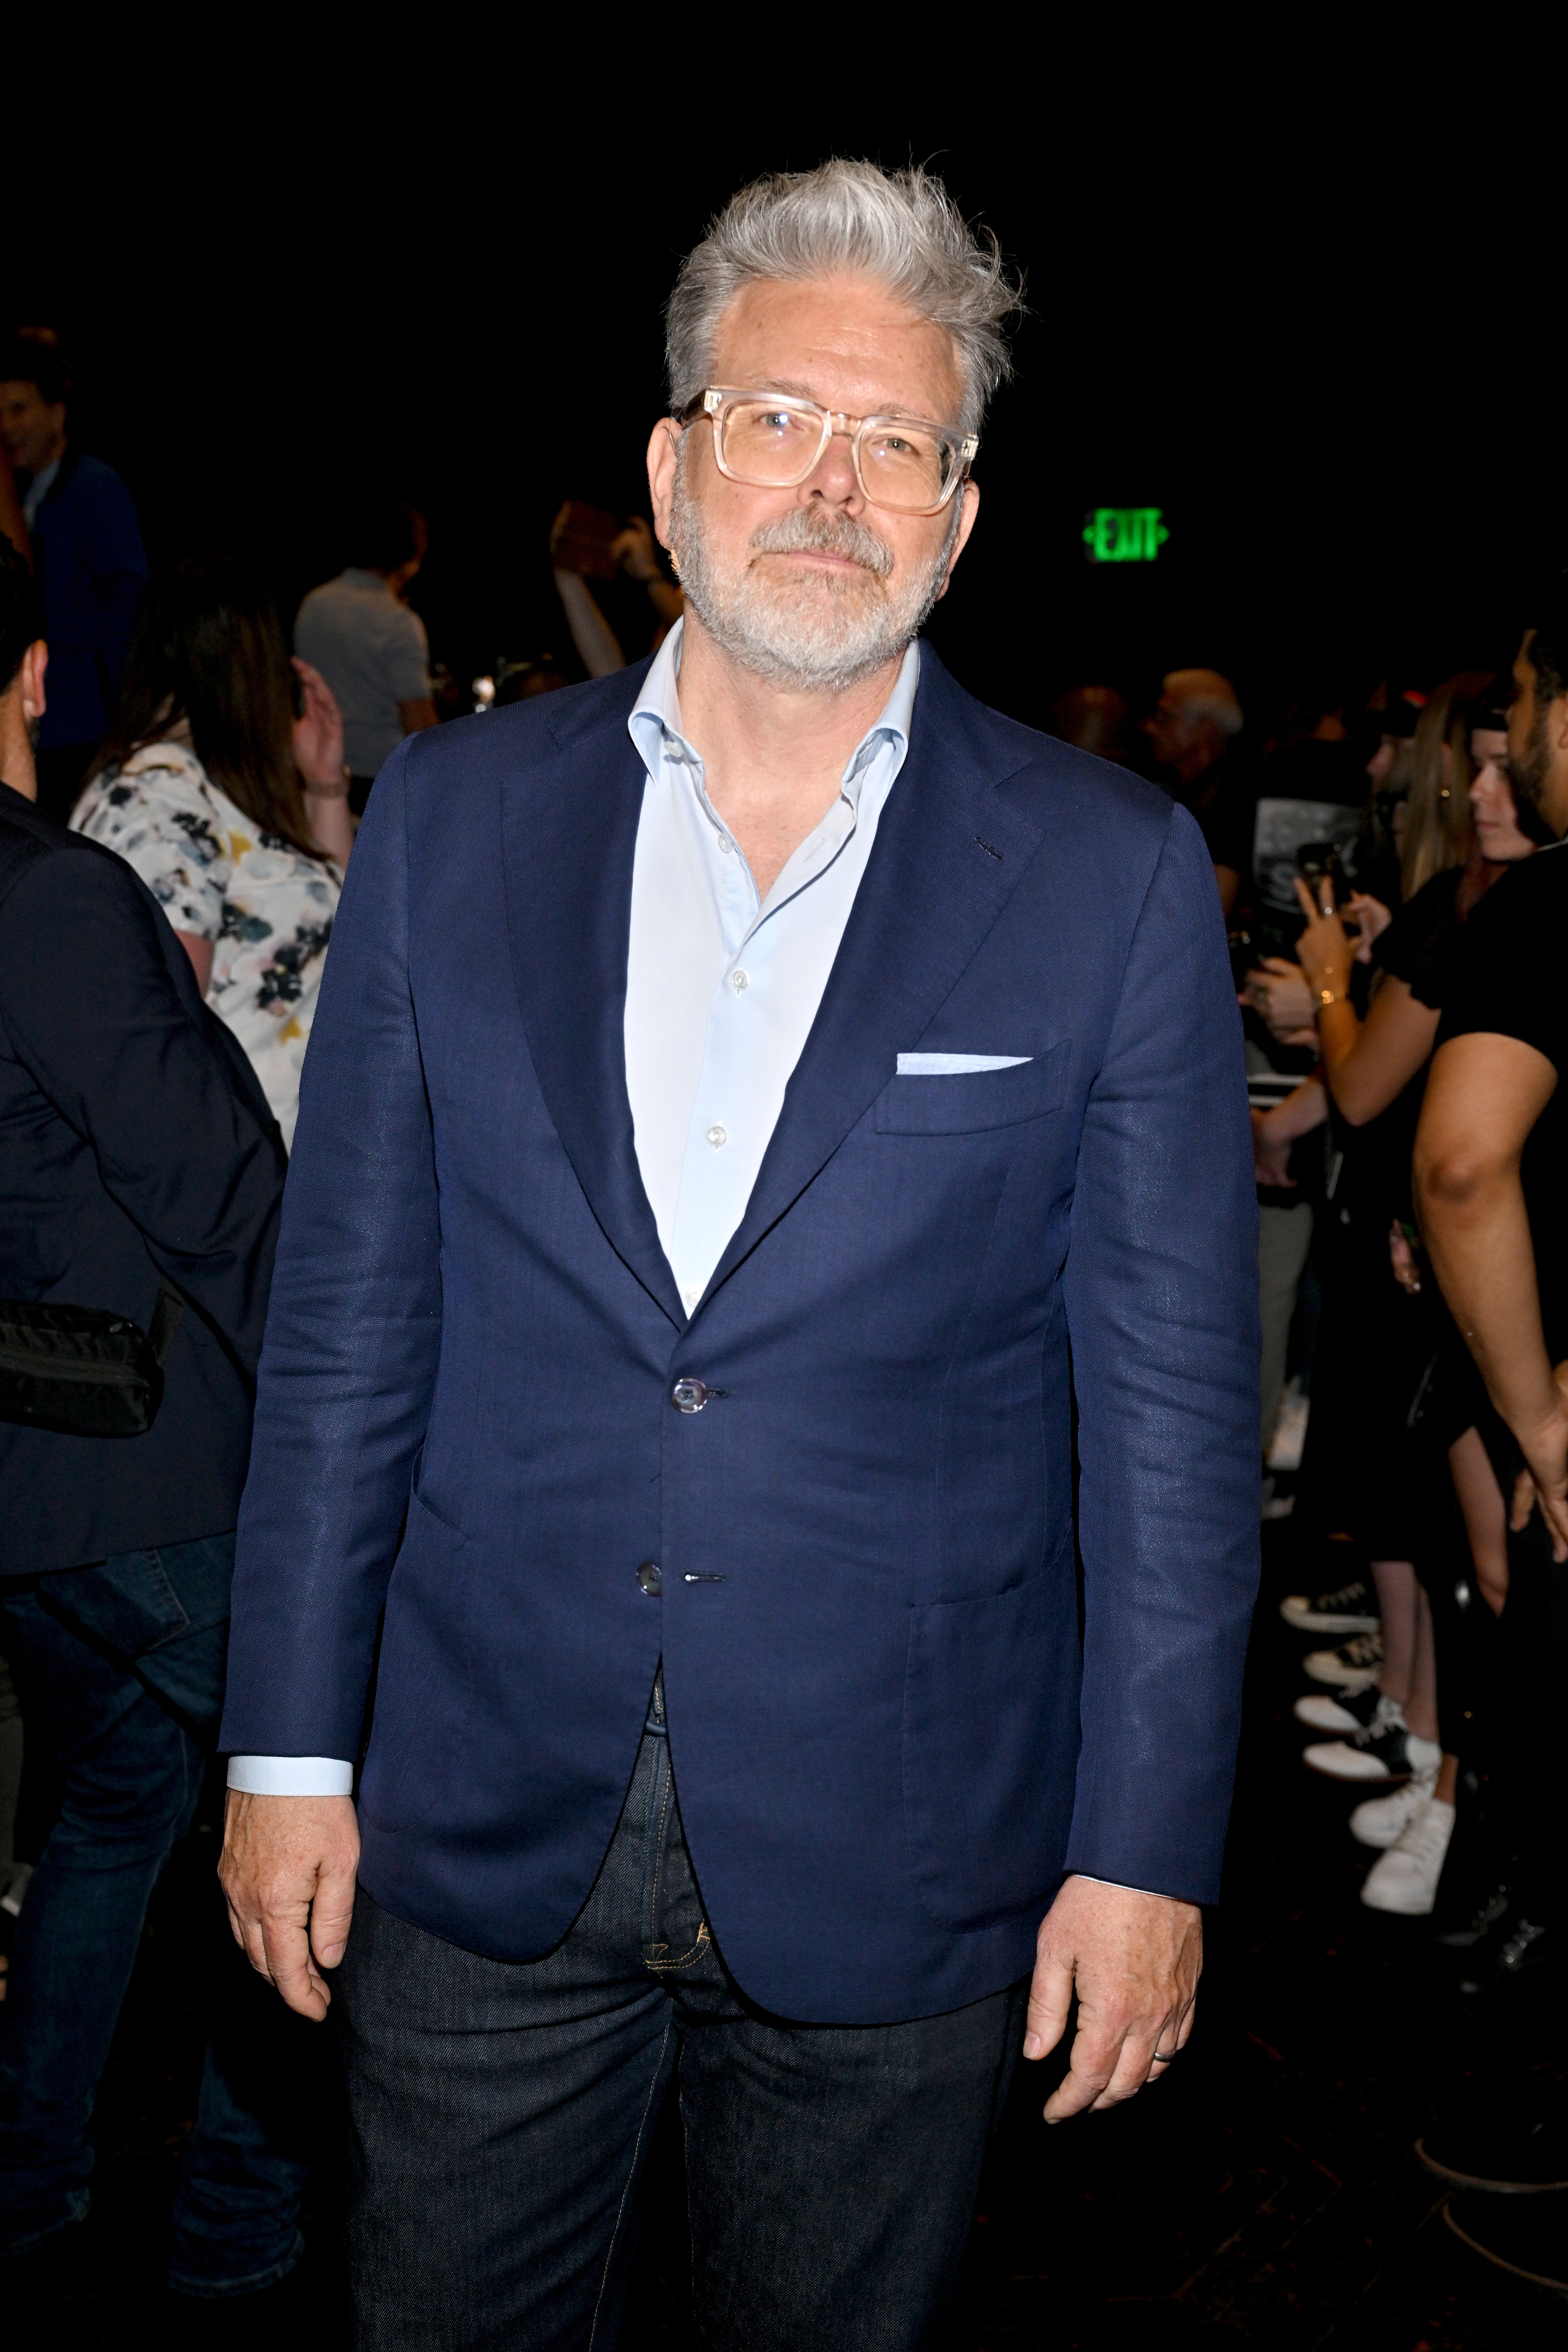 Christopher McQuarrie with gray hair and beard wears a blue blazer and light blue shirt at a public event. Other attendees are in the background